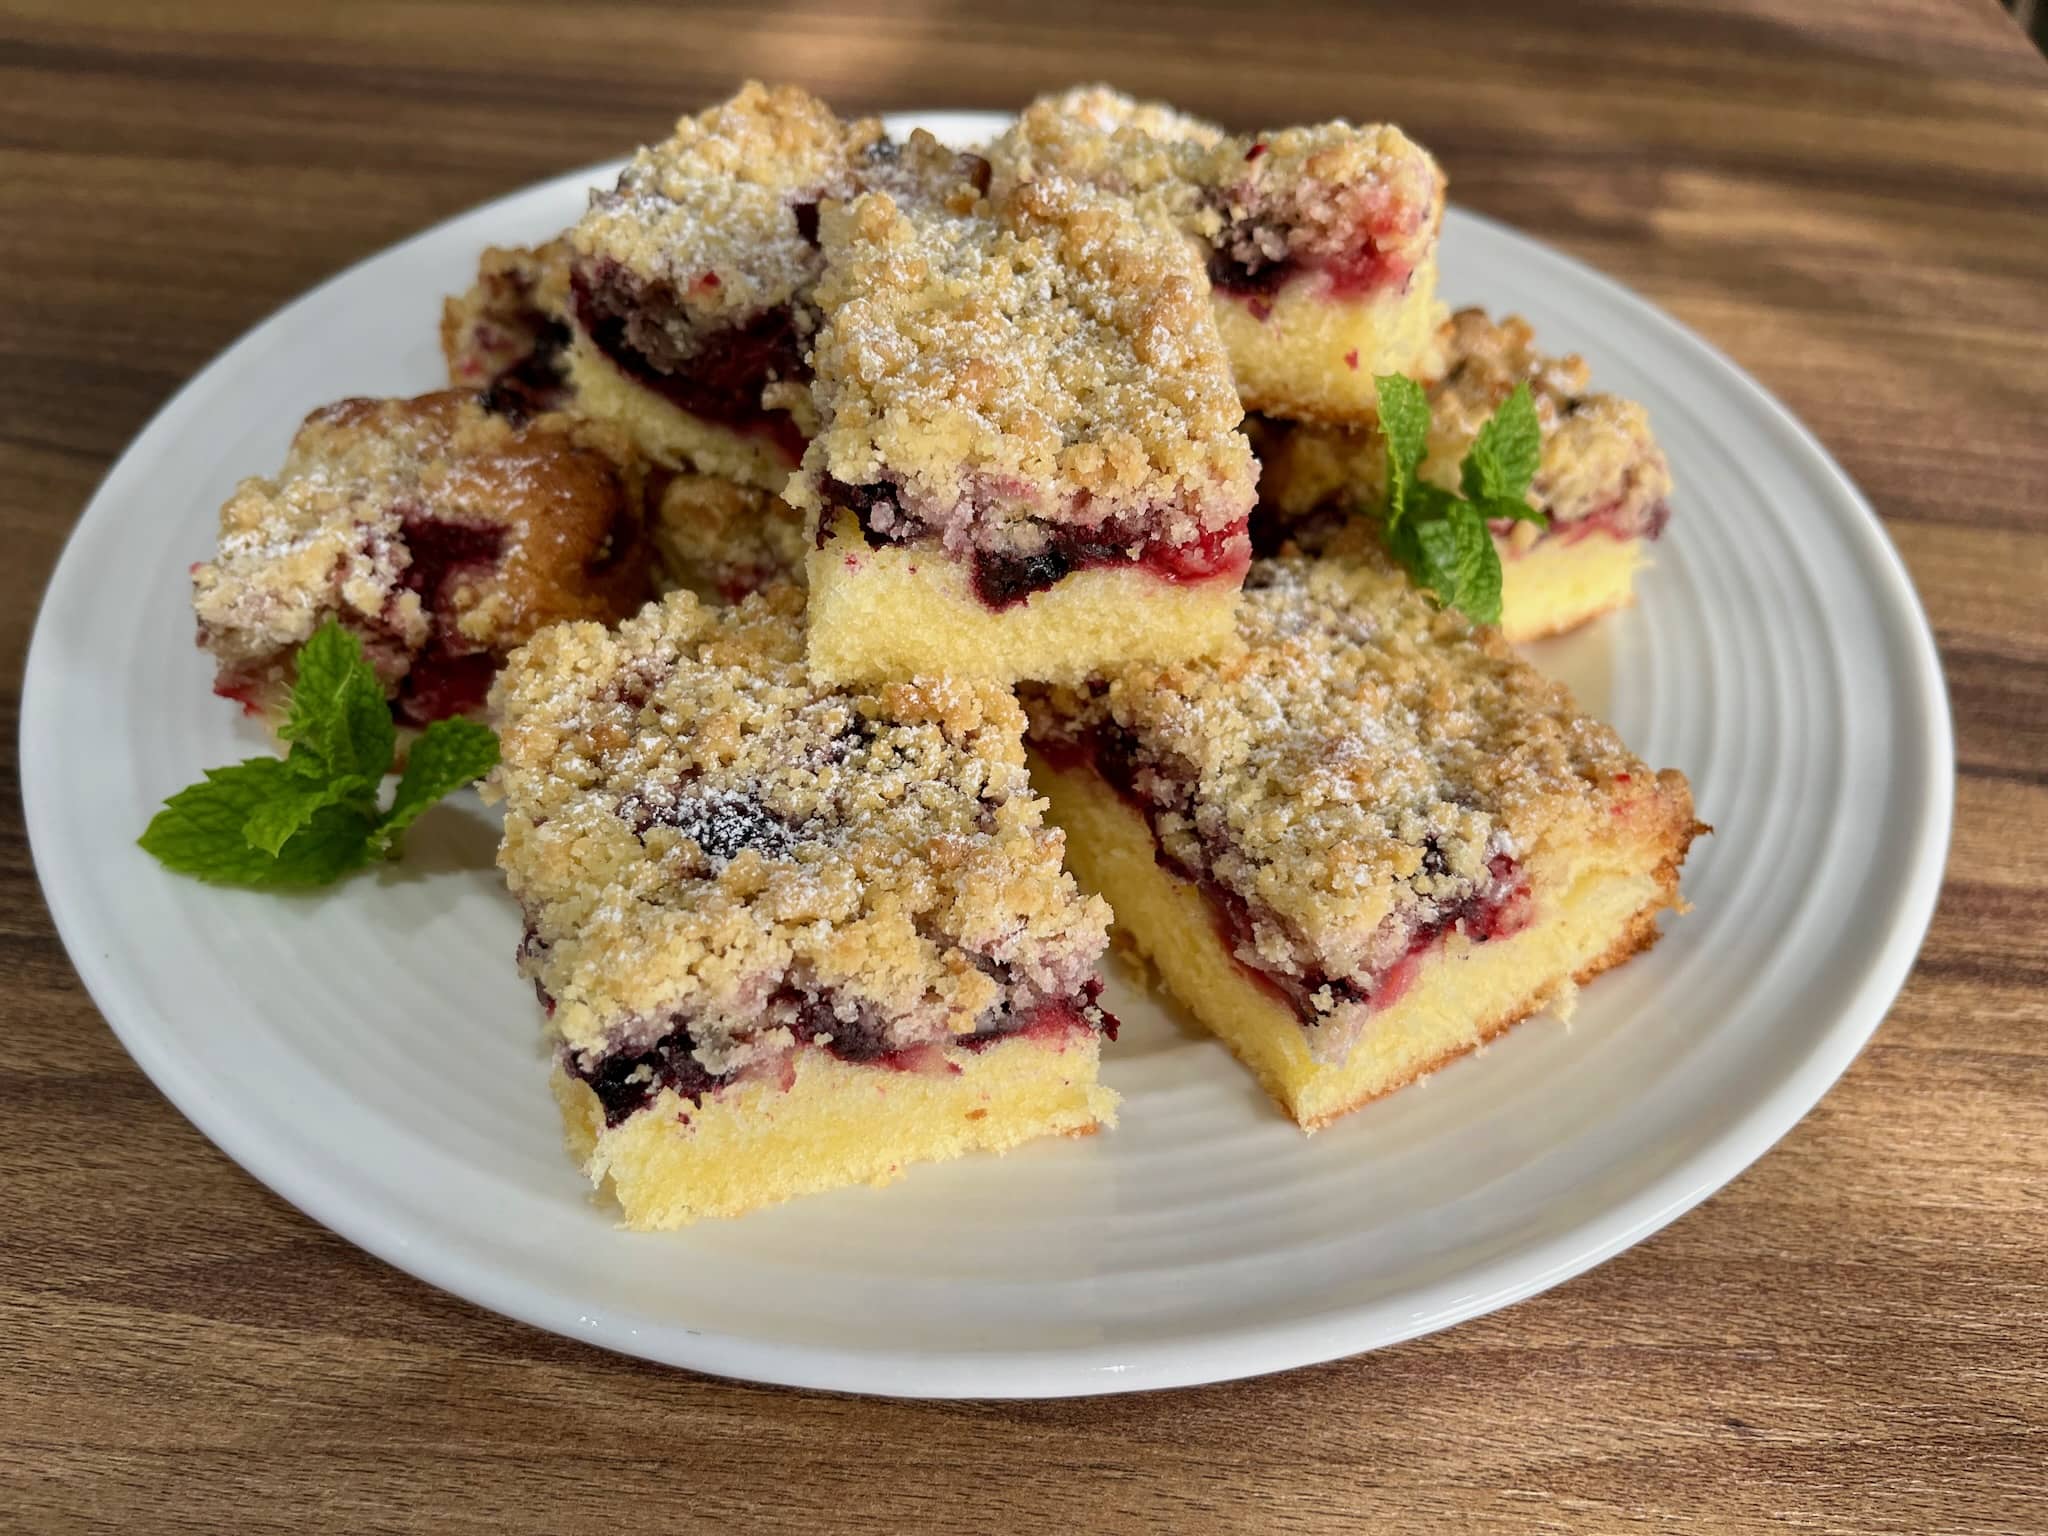 A plate of freshly sliced Summer Berry Crumble Cake